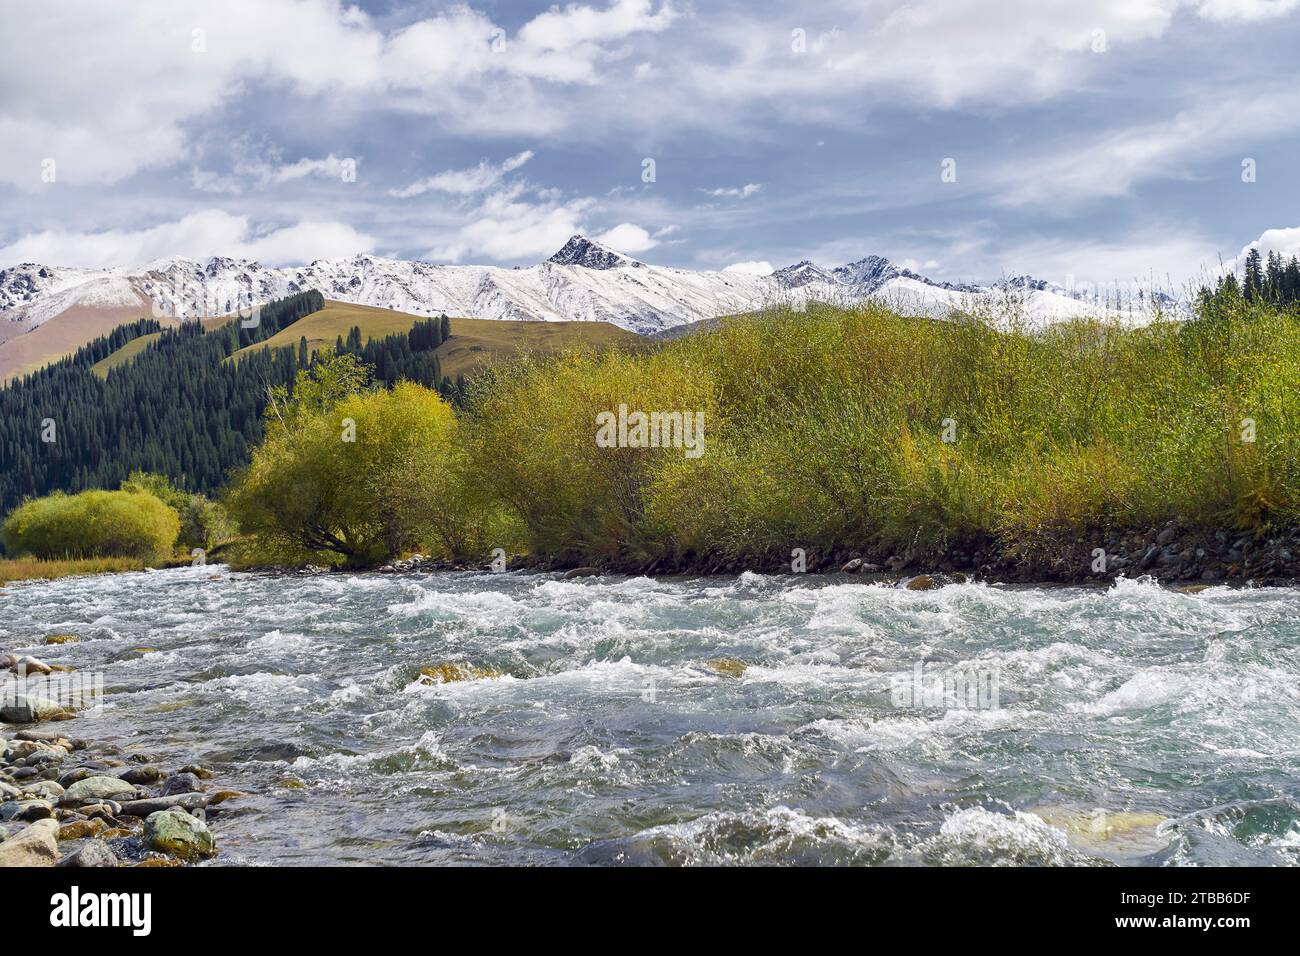 beautiful landscape of flowing river, colorful bushes and snowmountain in Xinjiang, China Stock Photo